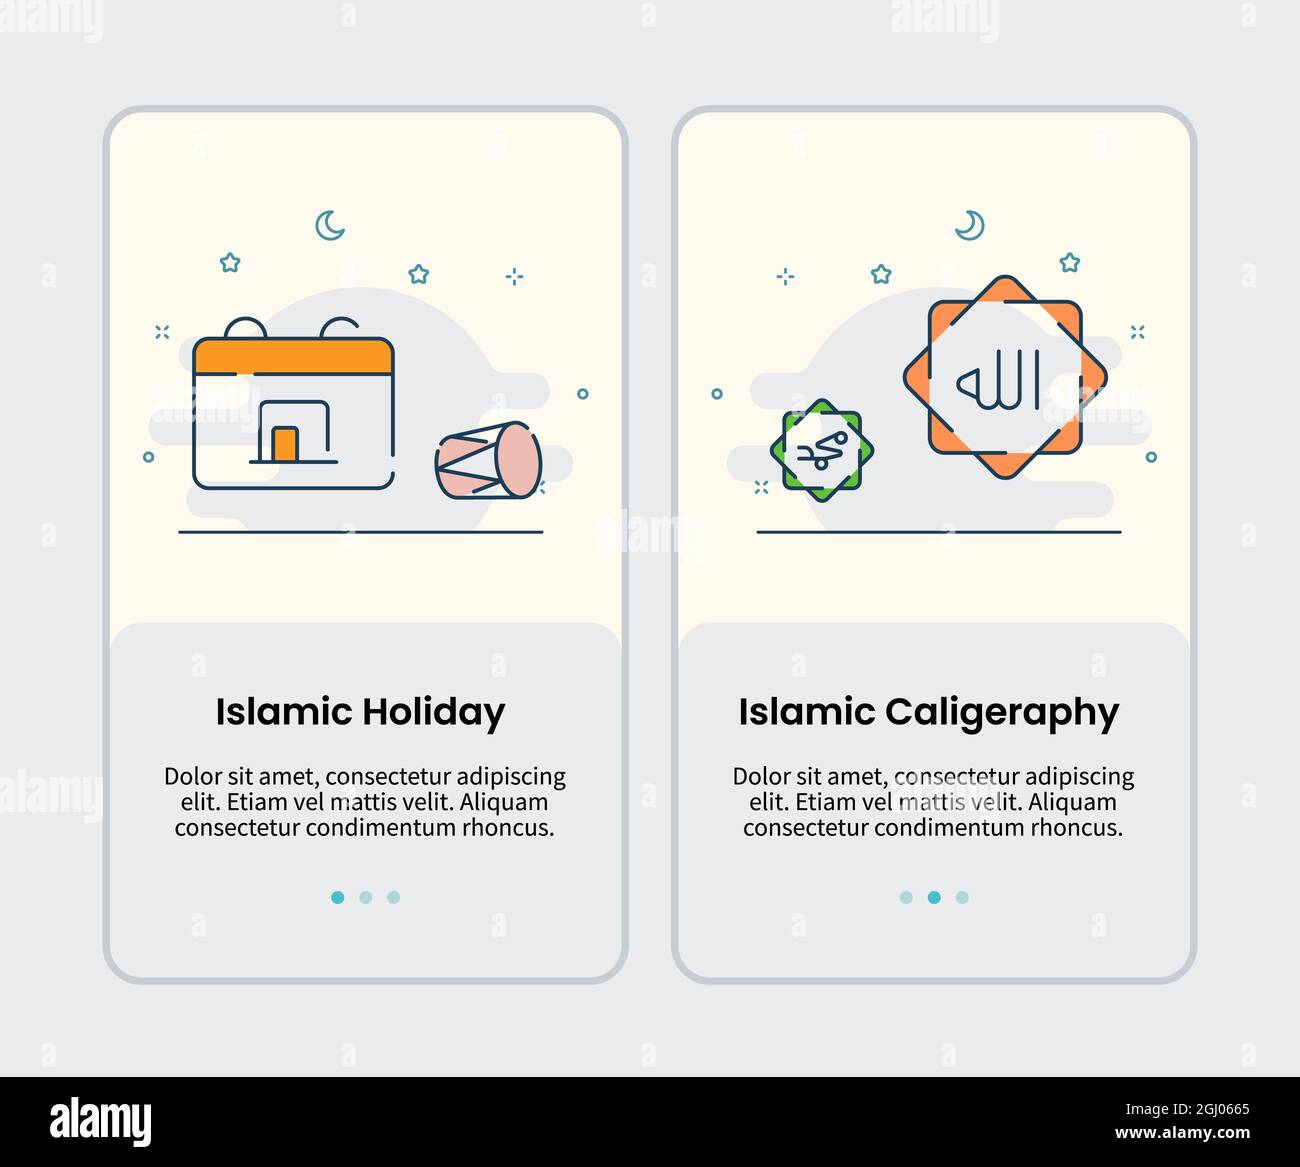 islamic holiday and islamic caligraphy icons onboarding template for mobile ui user interface app application design vector illustration Stock Photo